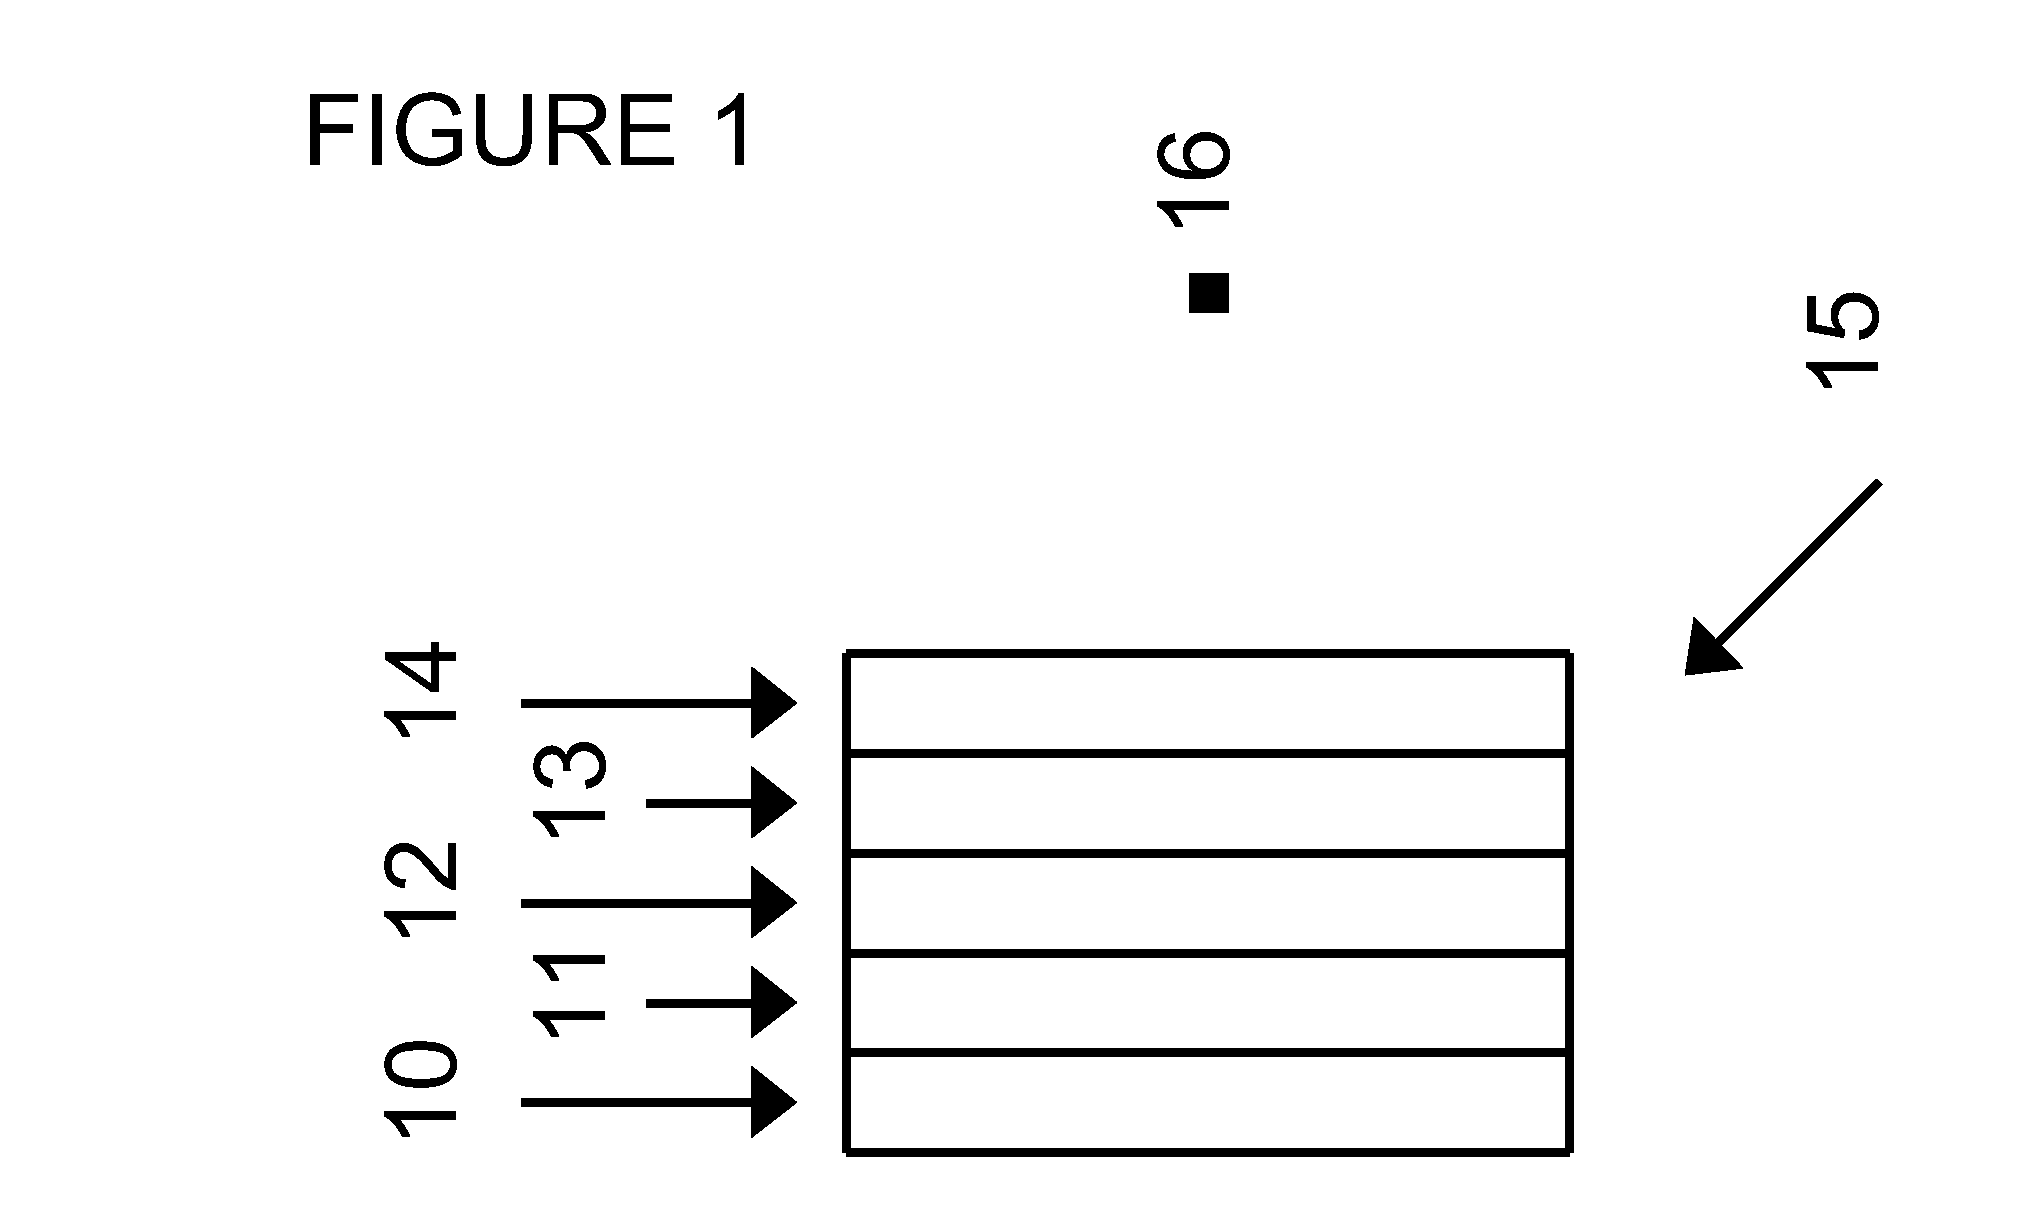 Holographic display device comprising magneto-optical spatial light modulator